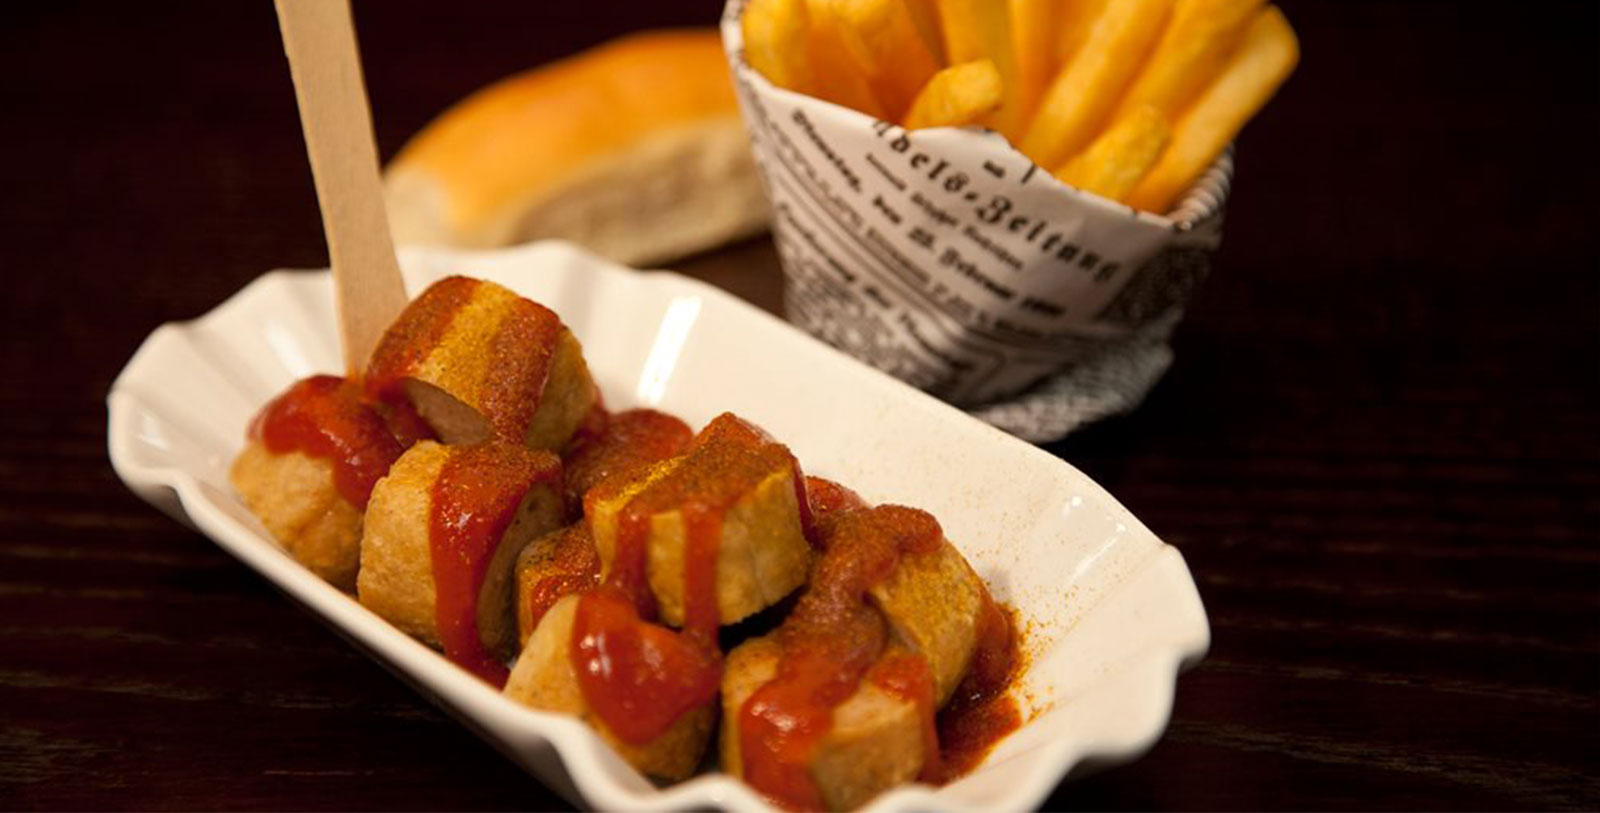 Taste Hotel Adlon's signature Currywurst, a local classic dating back to 1949.